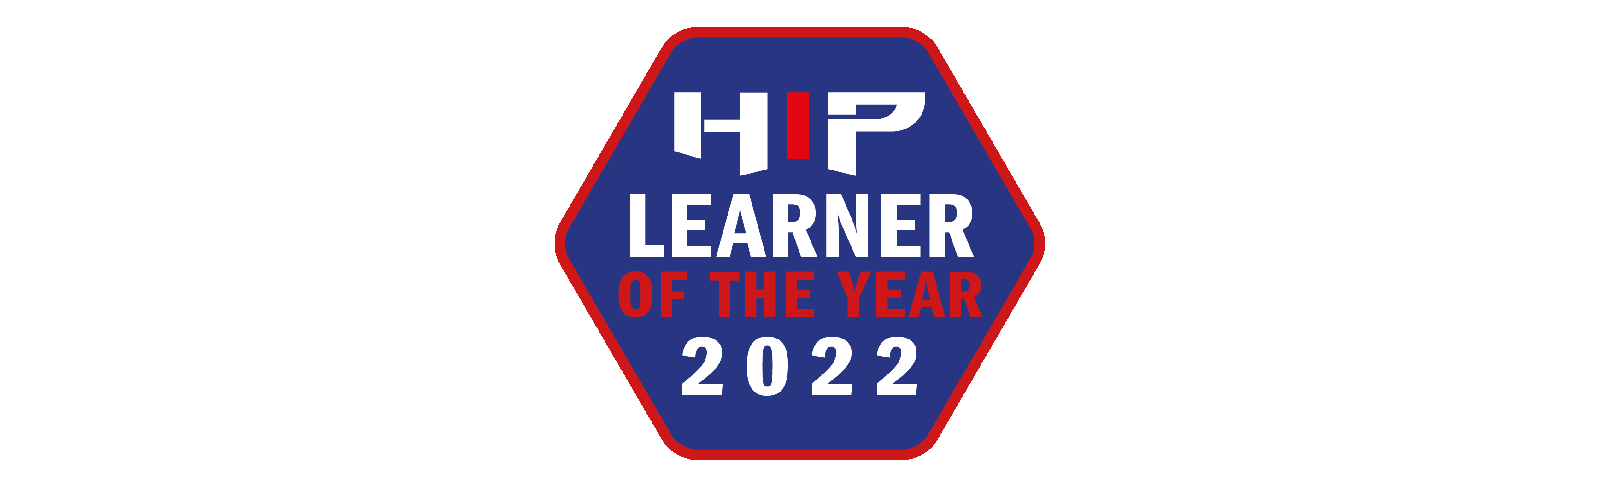 HIP Learner of the Year logo